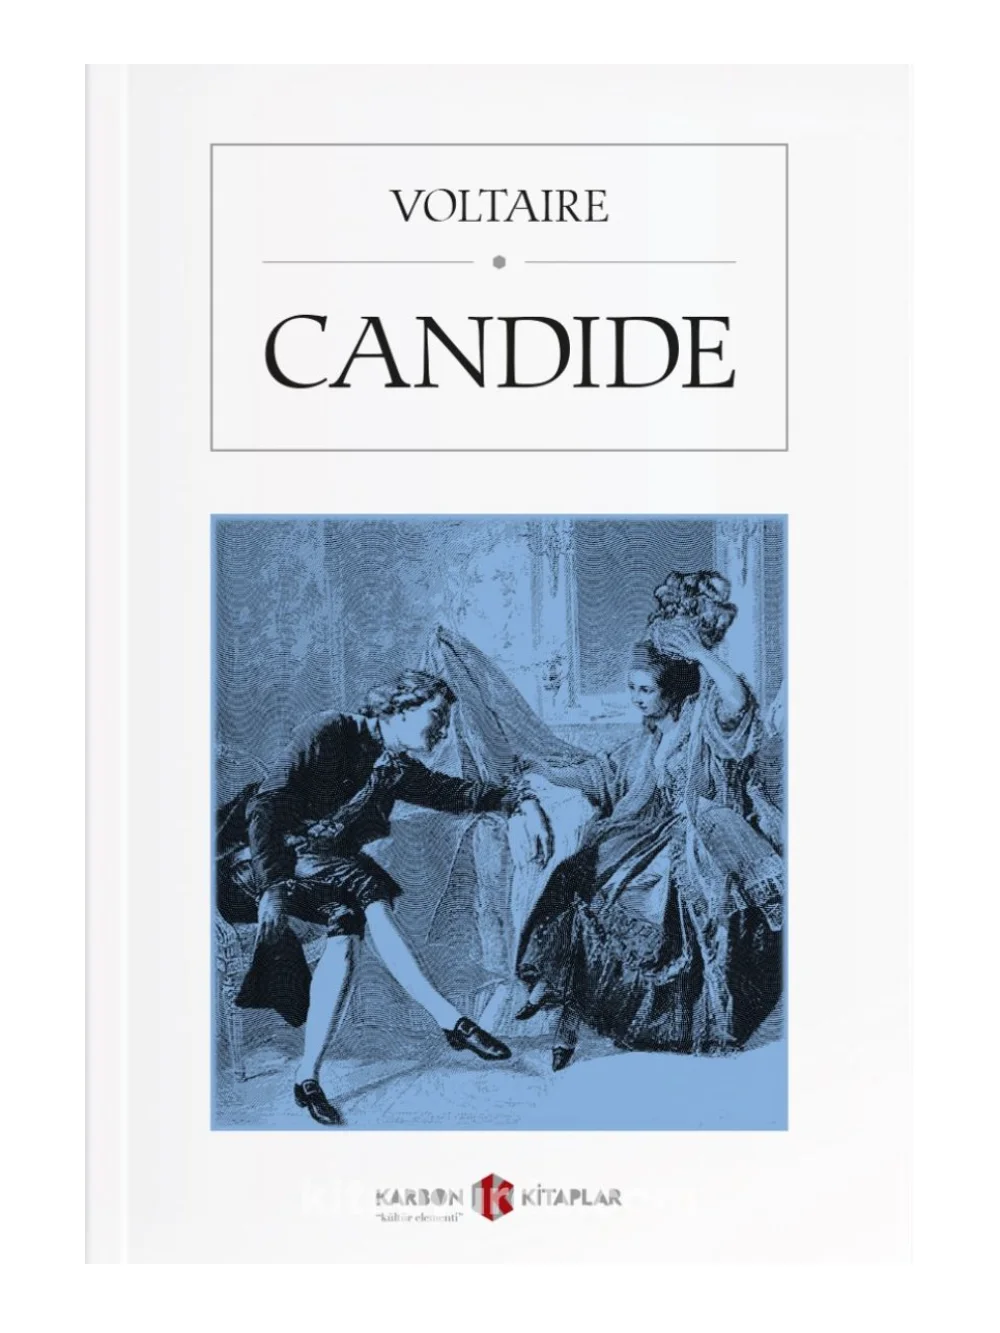 

Candide - Voltaire - French book - Top classics of the world literature - Nice gift for friends and French learners